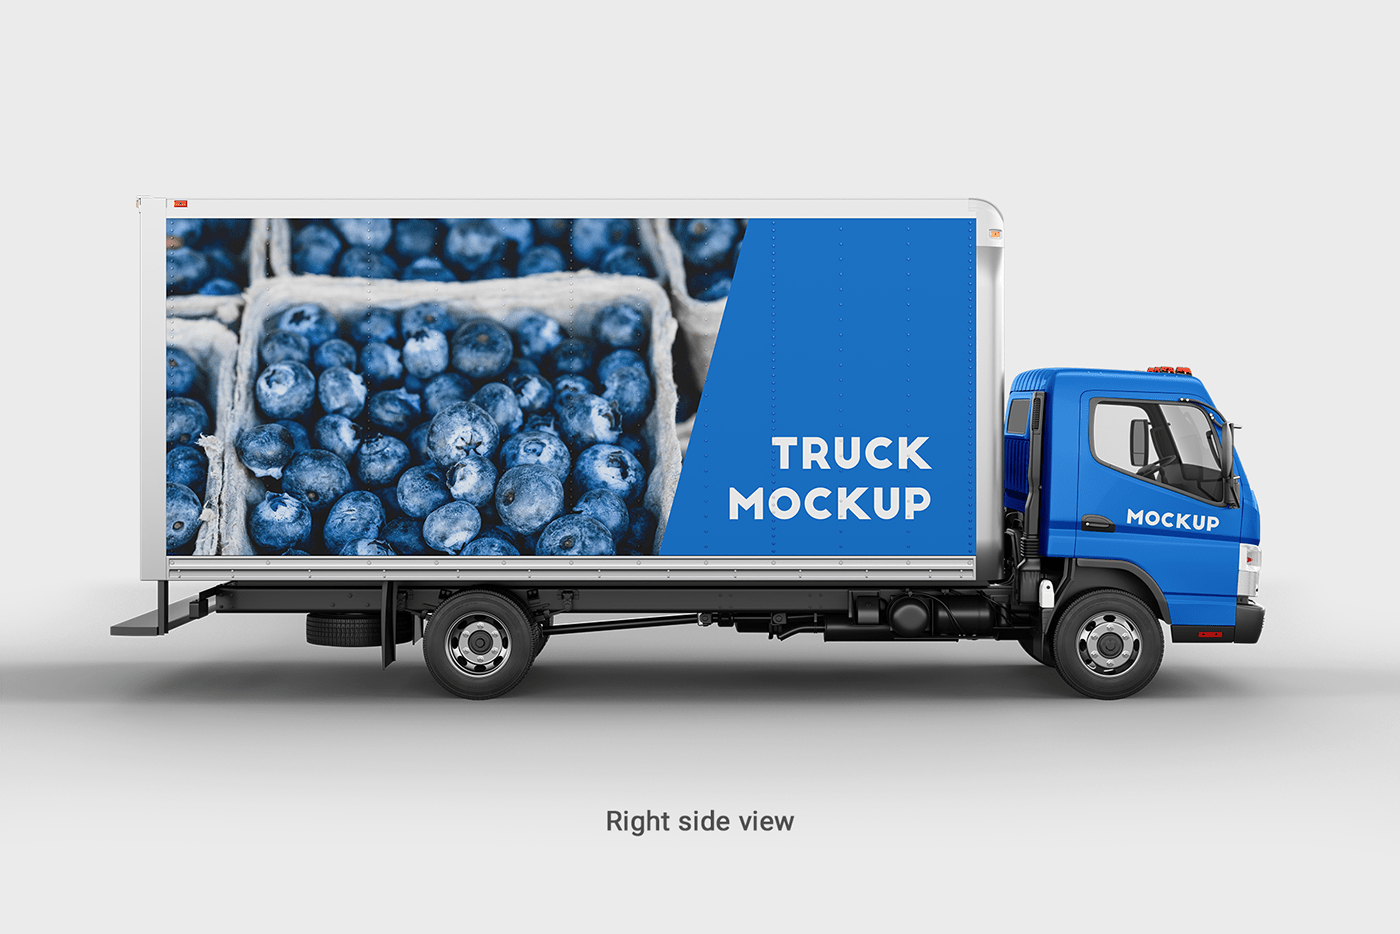 advertising mockup banner company identity delivery truck mockup mitsubishi fuso presentation template spedition &logistics vehicle branding wrapping mockup wraps & stickers